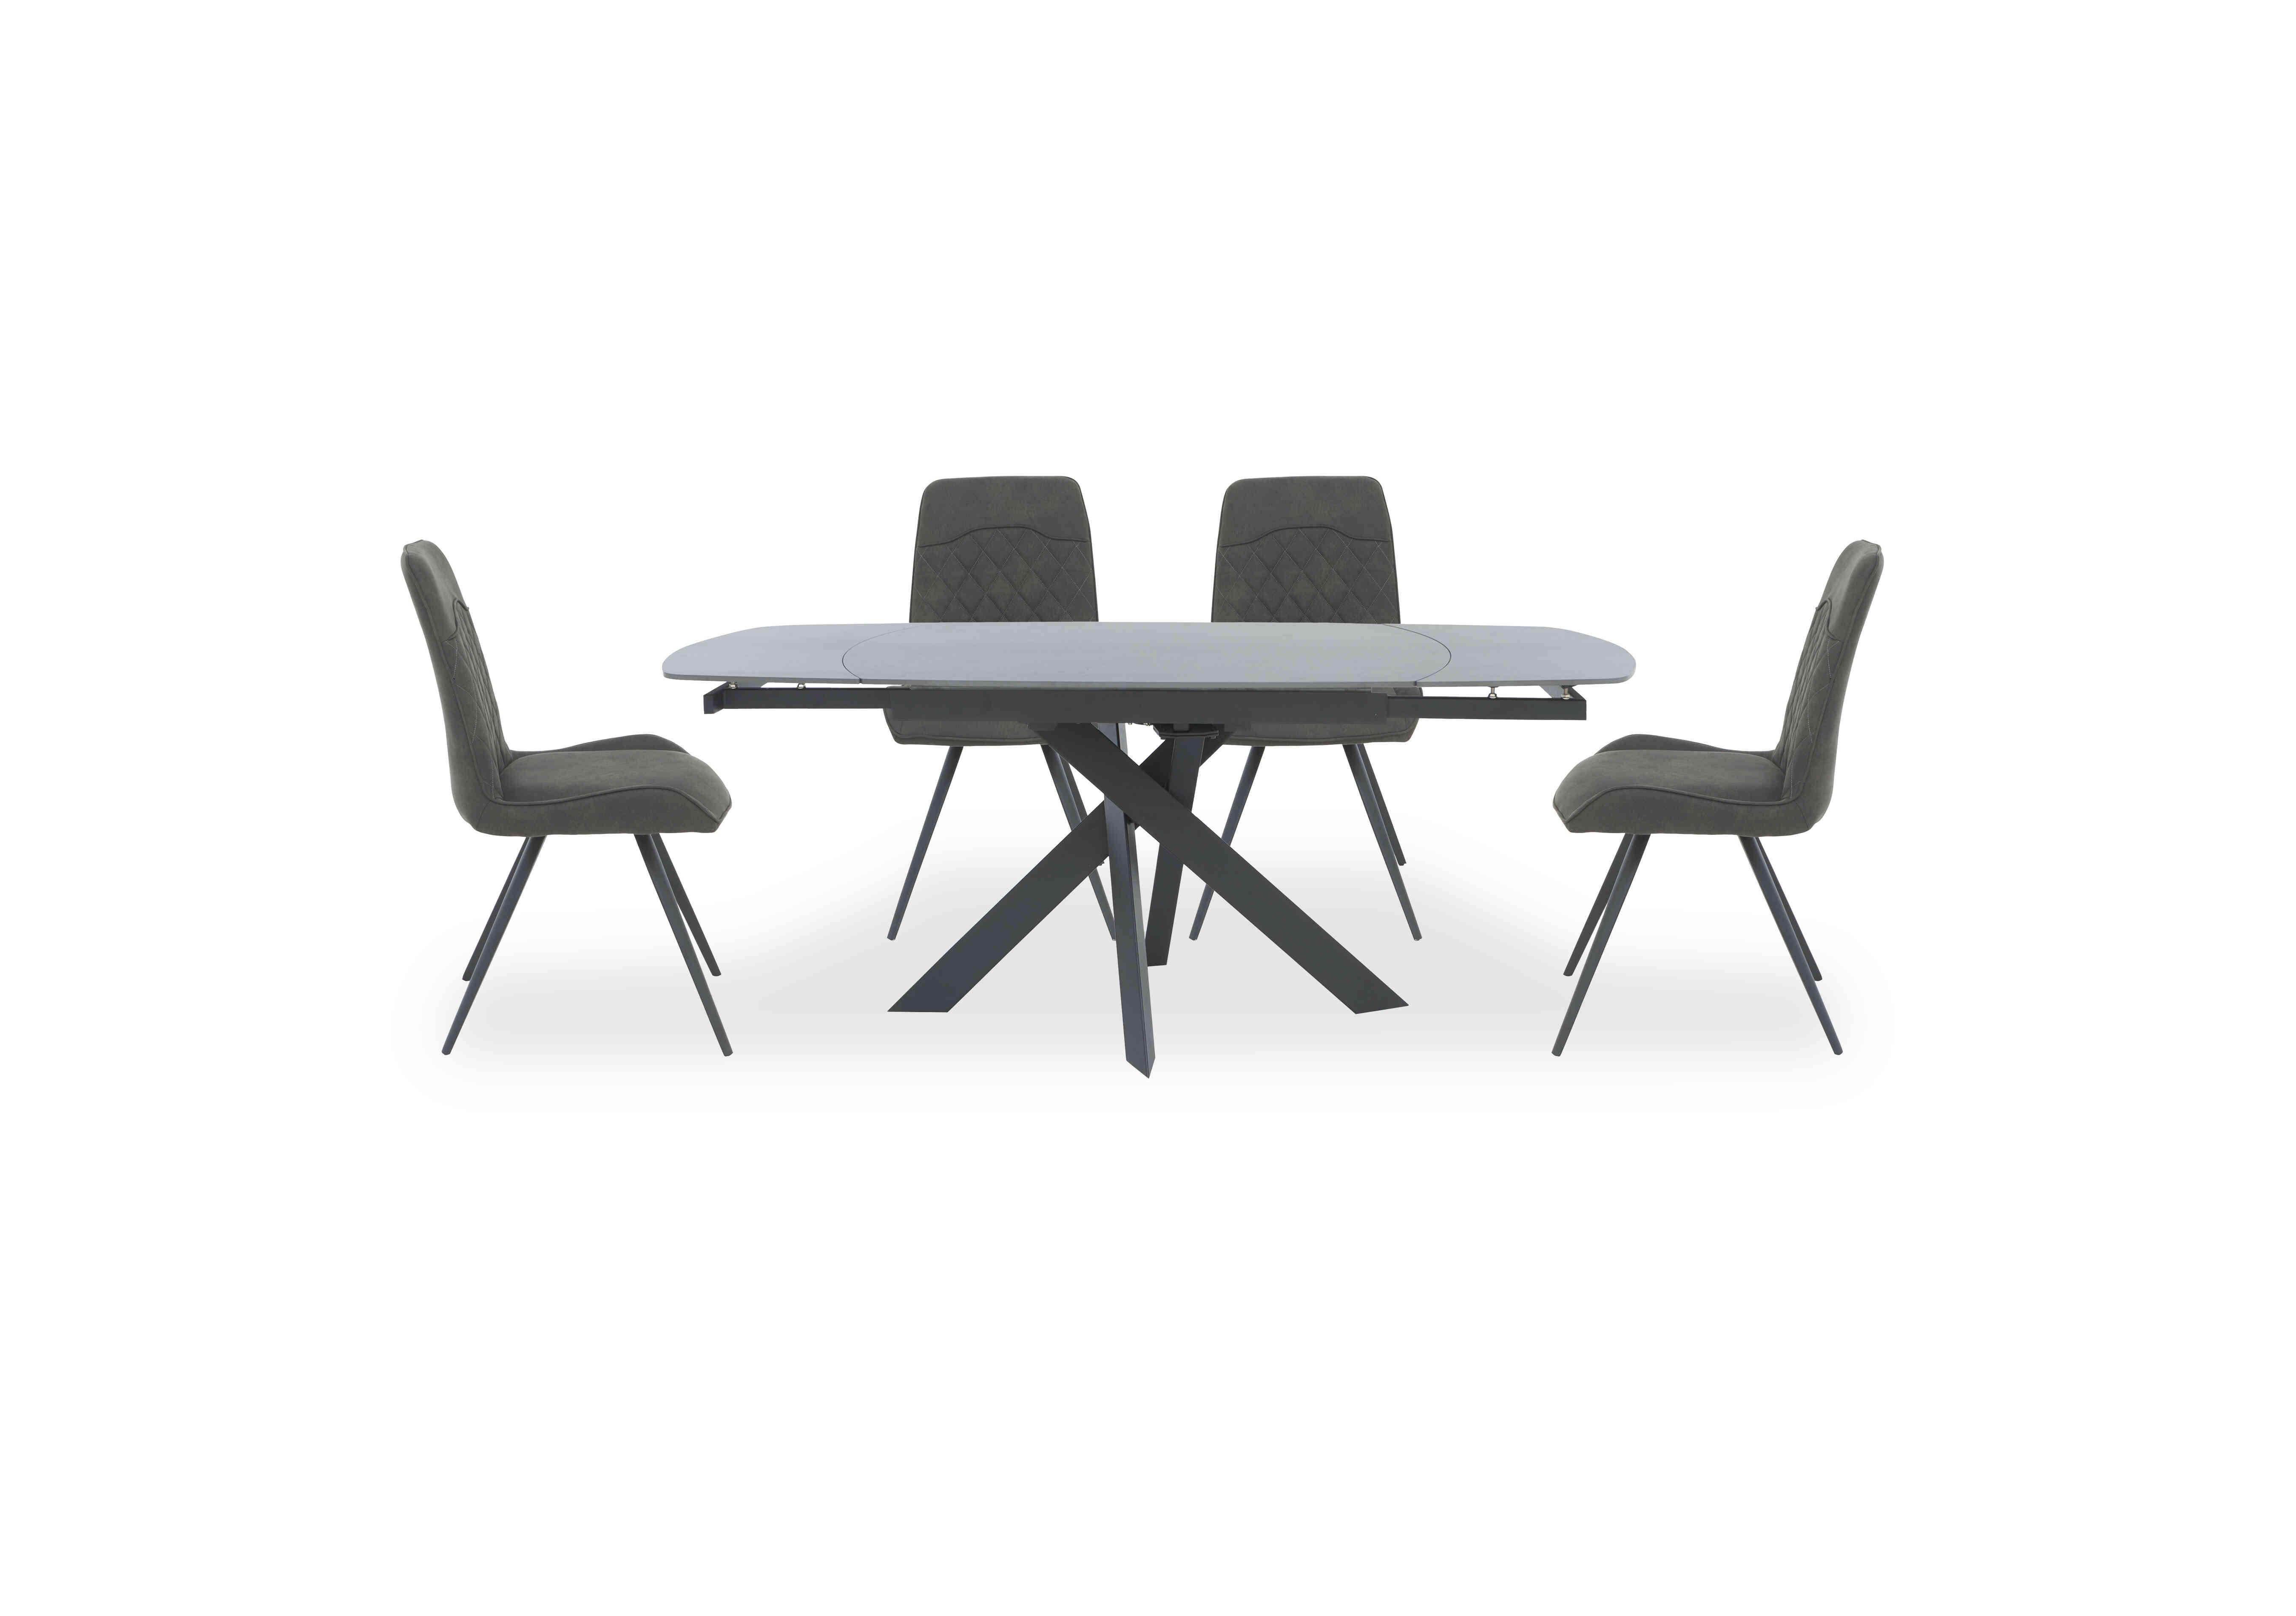 Warrior Grey Swivel Extending Dining Table with 4 Standard Dining Chairs in Grey/Grey on Furniture Village